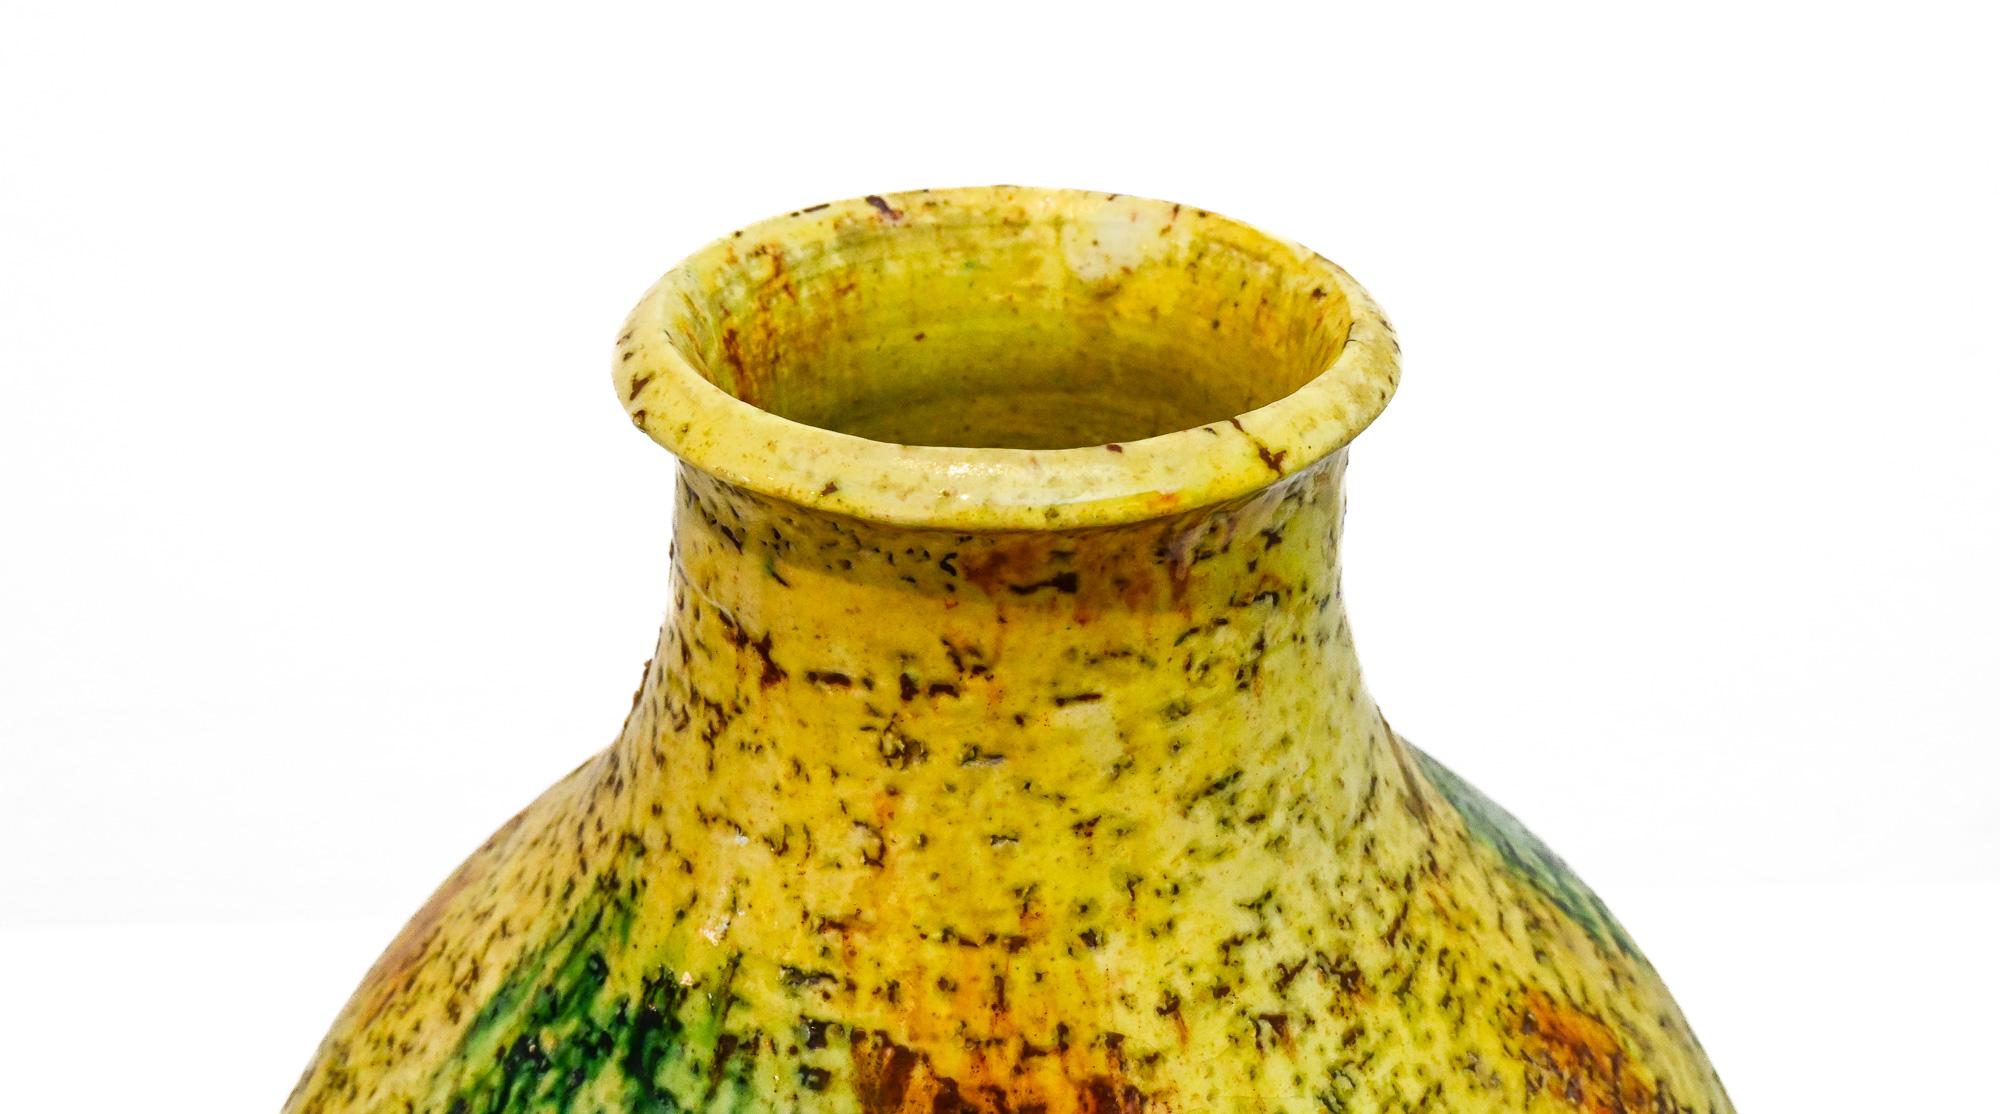 Tall yellow round vase by Marcello Fantoni (1915-2011) – Florence, Italy Signed to the base Fantoni, dated 1972.
Provenance: sourced directly from the Fantoni family

